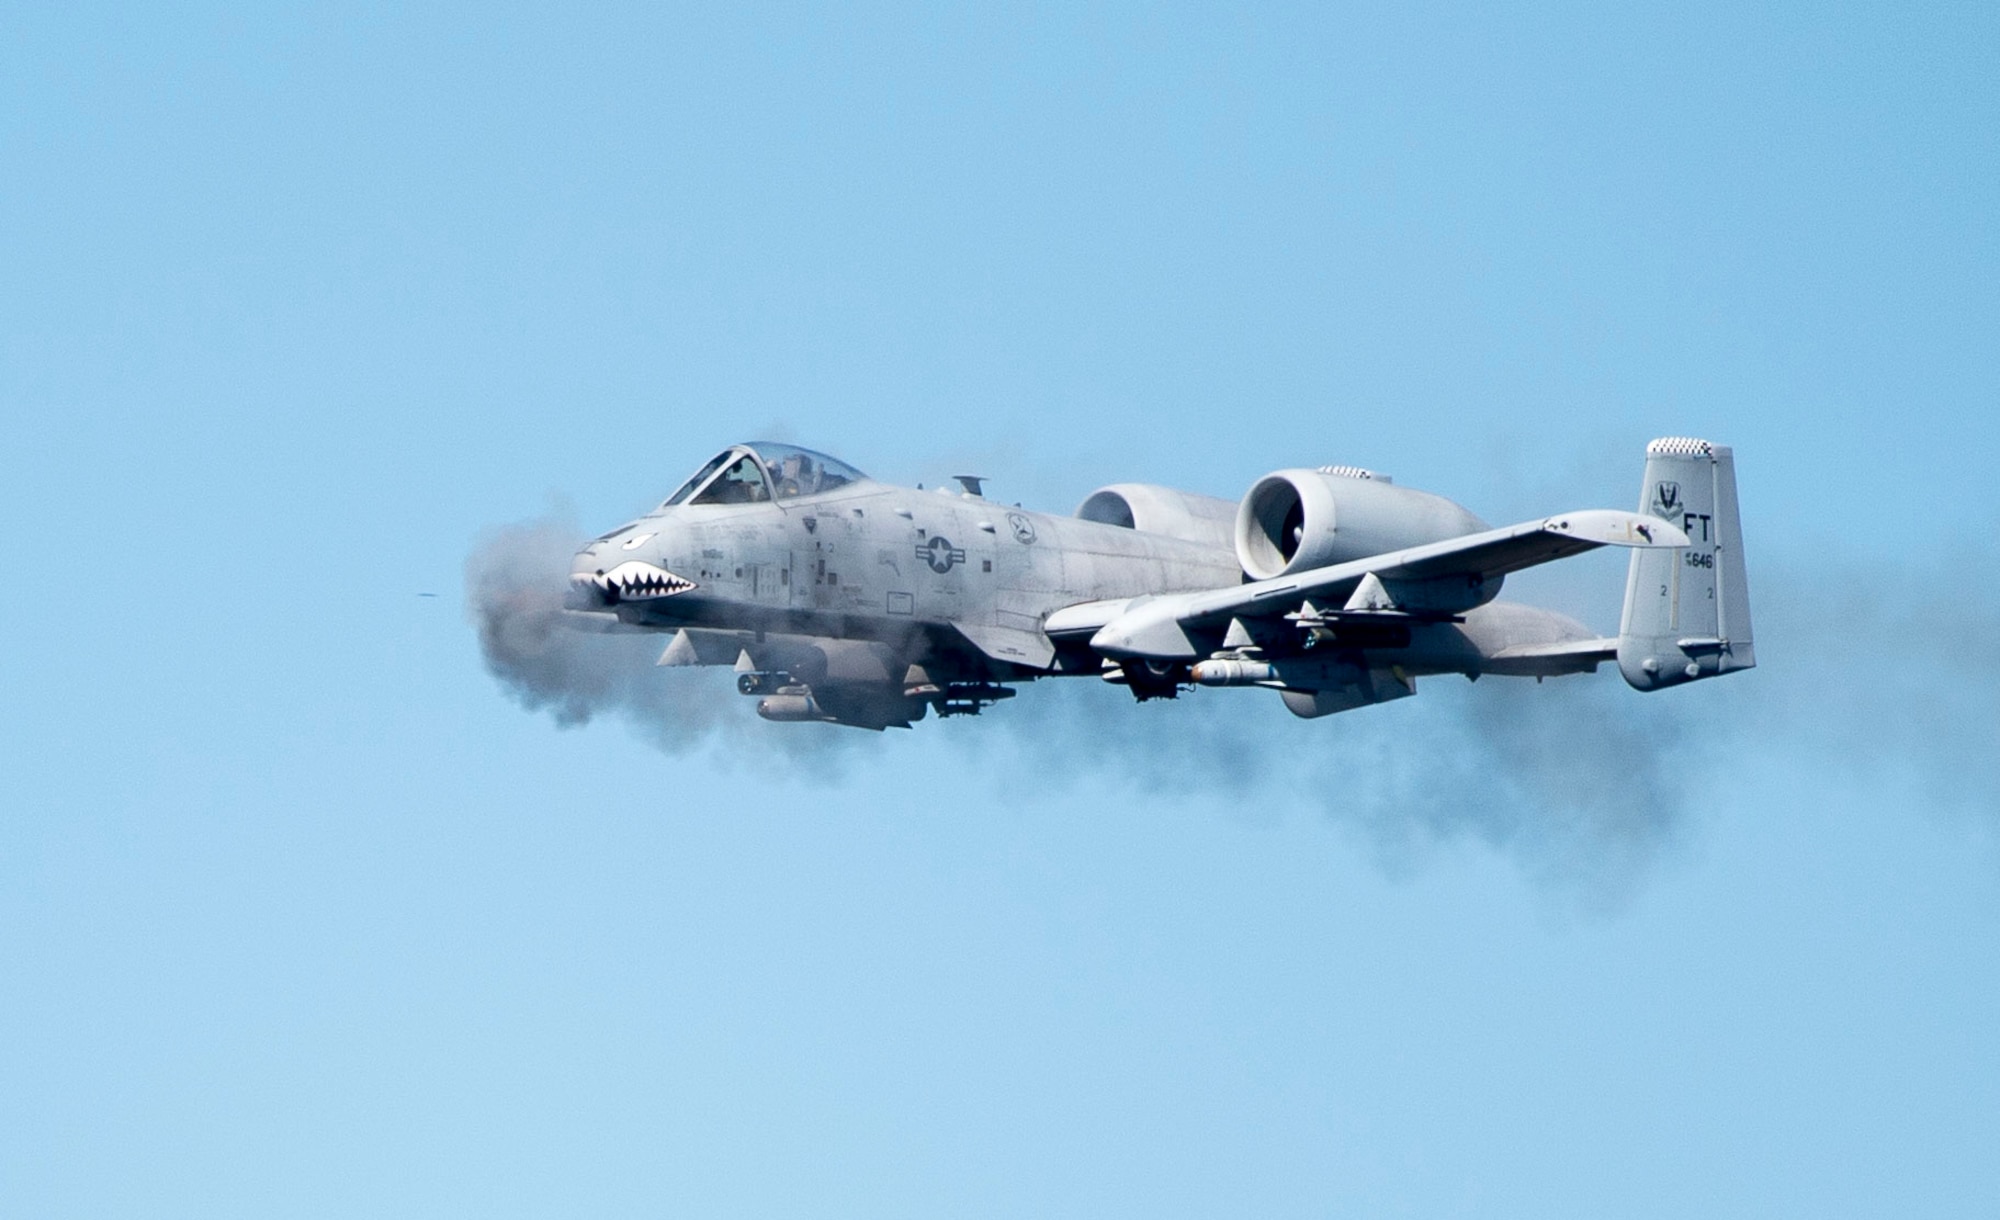 An A-10 Thunderbolt II fires the GAU-8 Avenger, a 30mm Gatling-style canon, over the Grand Bay Bombing and Gunnery Range at Moody Air Force Base, Ga., Feb. 11, 2016. Multiple U.S. Air Force aircraft within Air Combat Command conducted joint aerial training that showcased the aircrafts tactical air and ground maneuvers, as well as its weapons capabilities. (U.S. Air Force photo by Staff Sgt. Brian J. Valencia/Released)